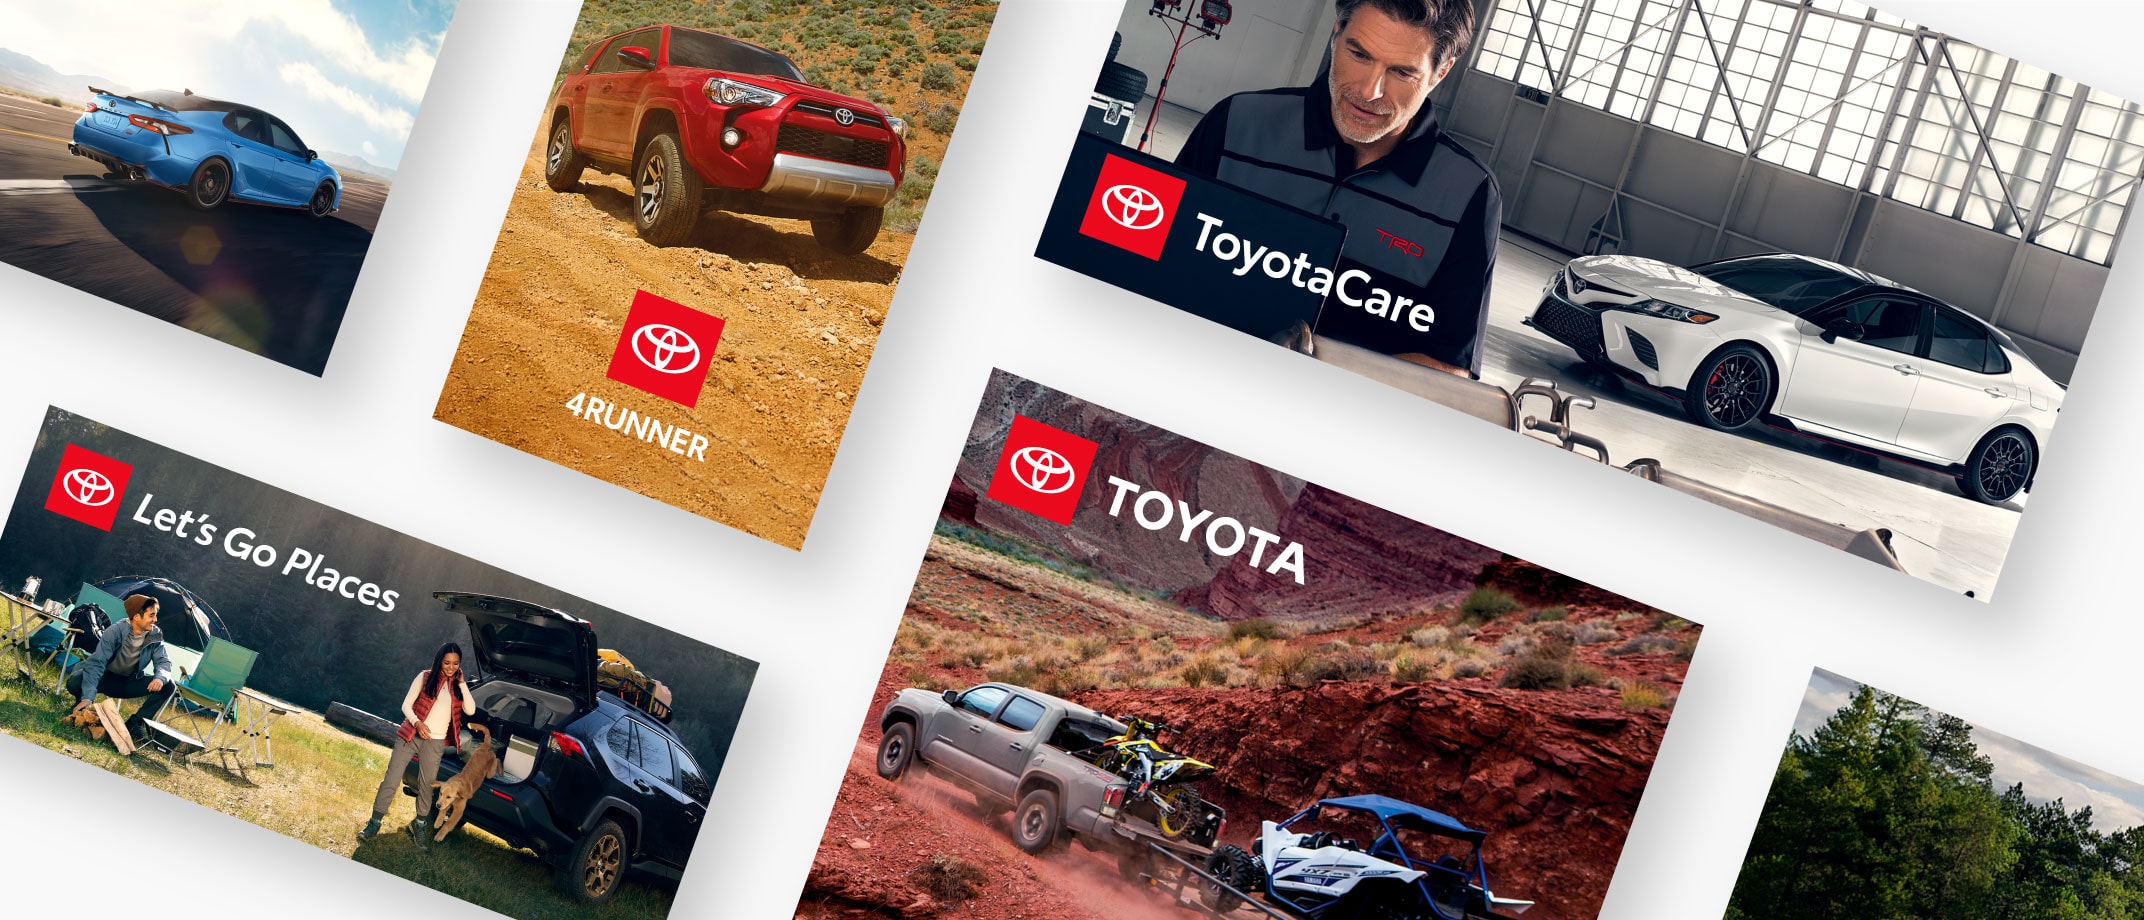 A collage of multiple Toyota ads with different logos.